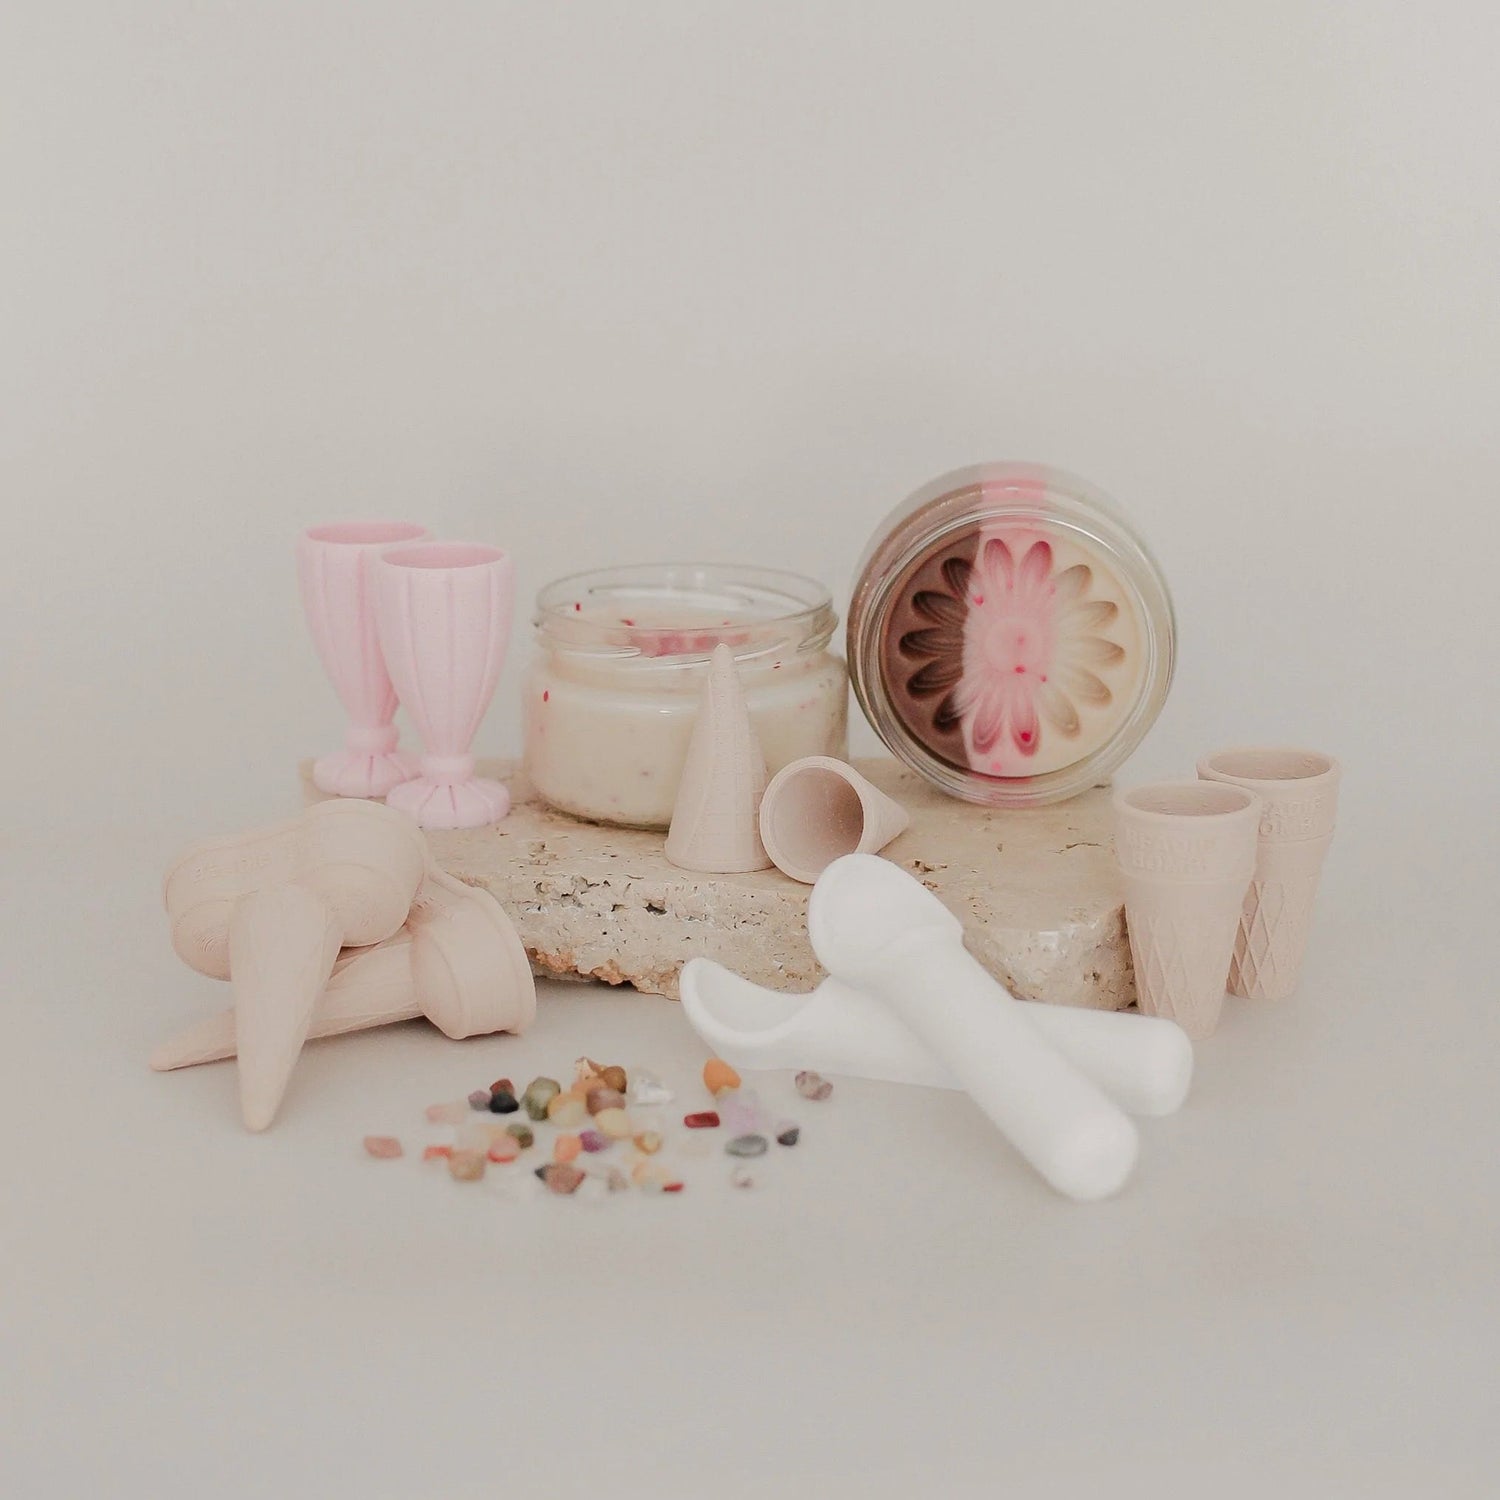 ICE-CREAM SHOP - DOUBLE SCOOP KIT by BEADIE BUG PLAY - The Playful Collective